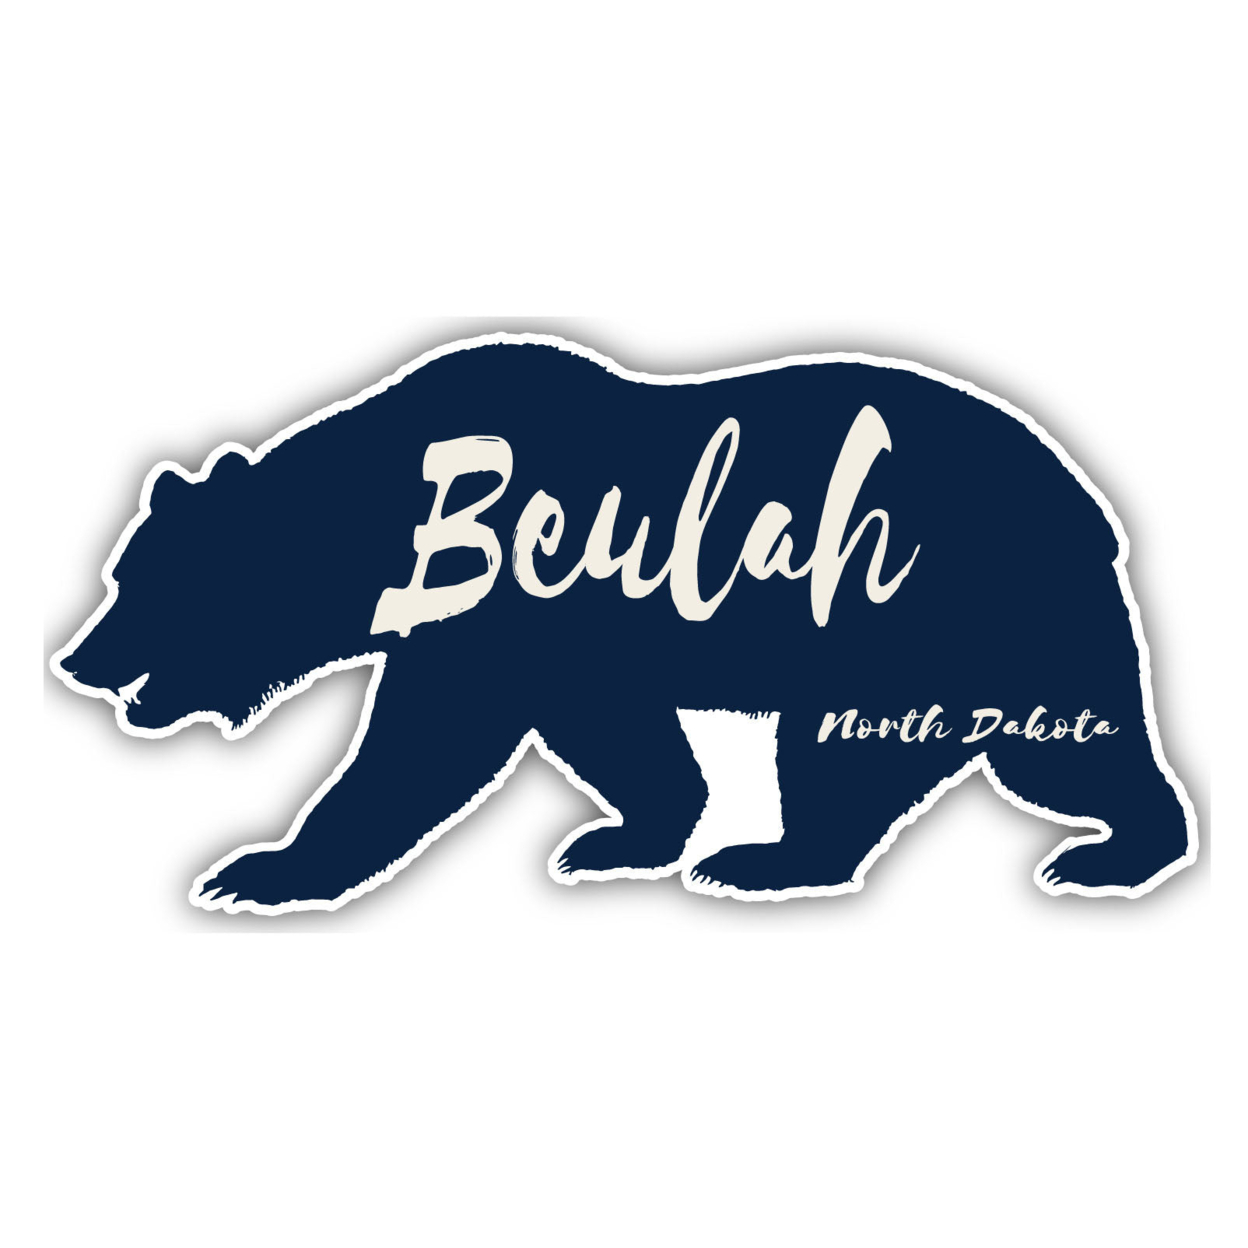 Beulah North Dakota Souvenir Decorative Stickers (Choose Theme And Size) - 4-Pack, 6-Inch, Great Outdoors